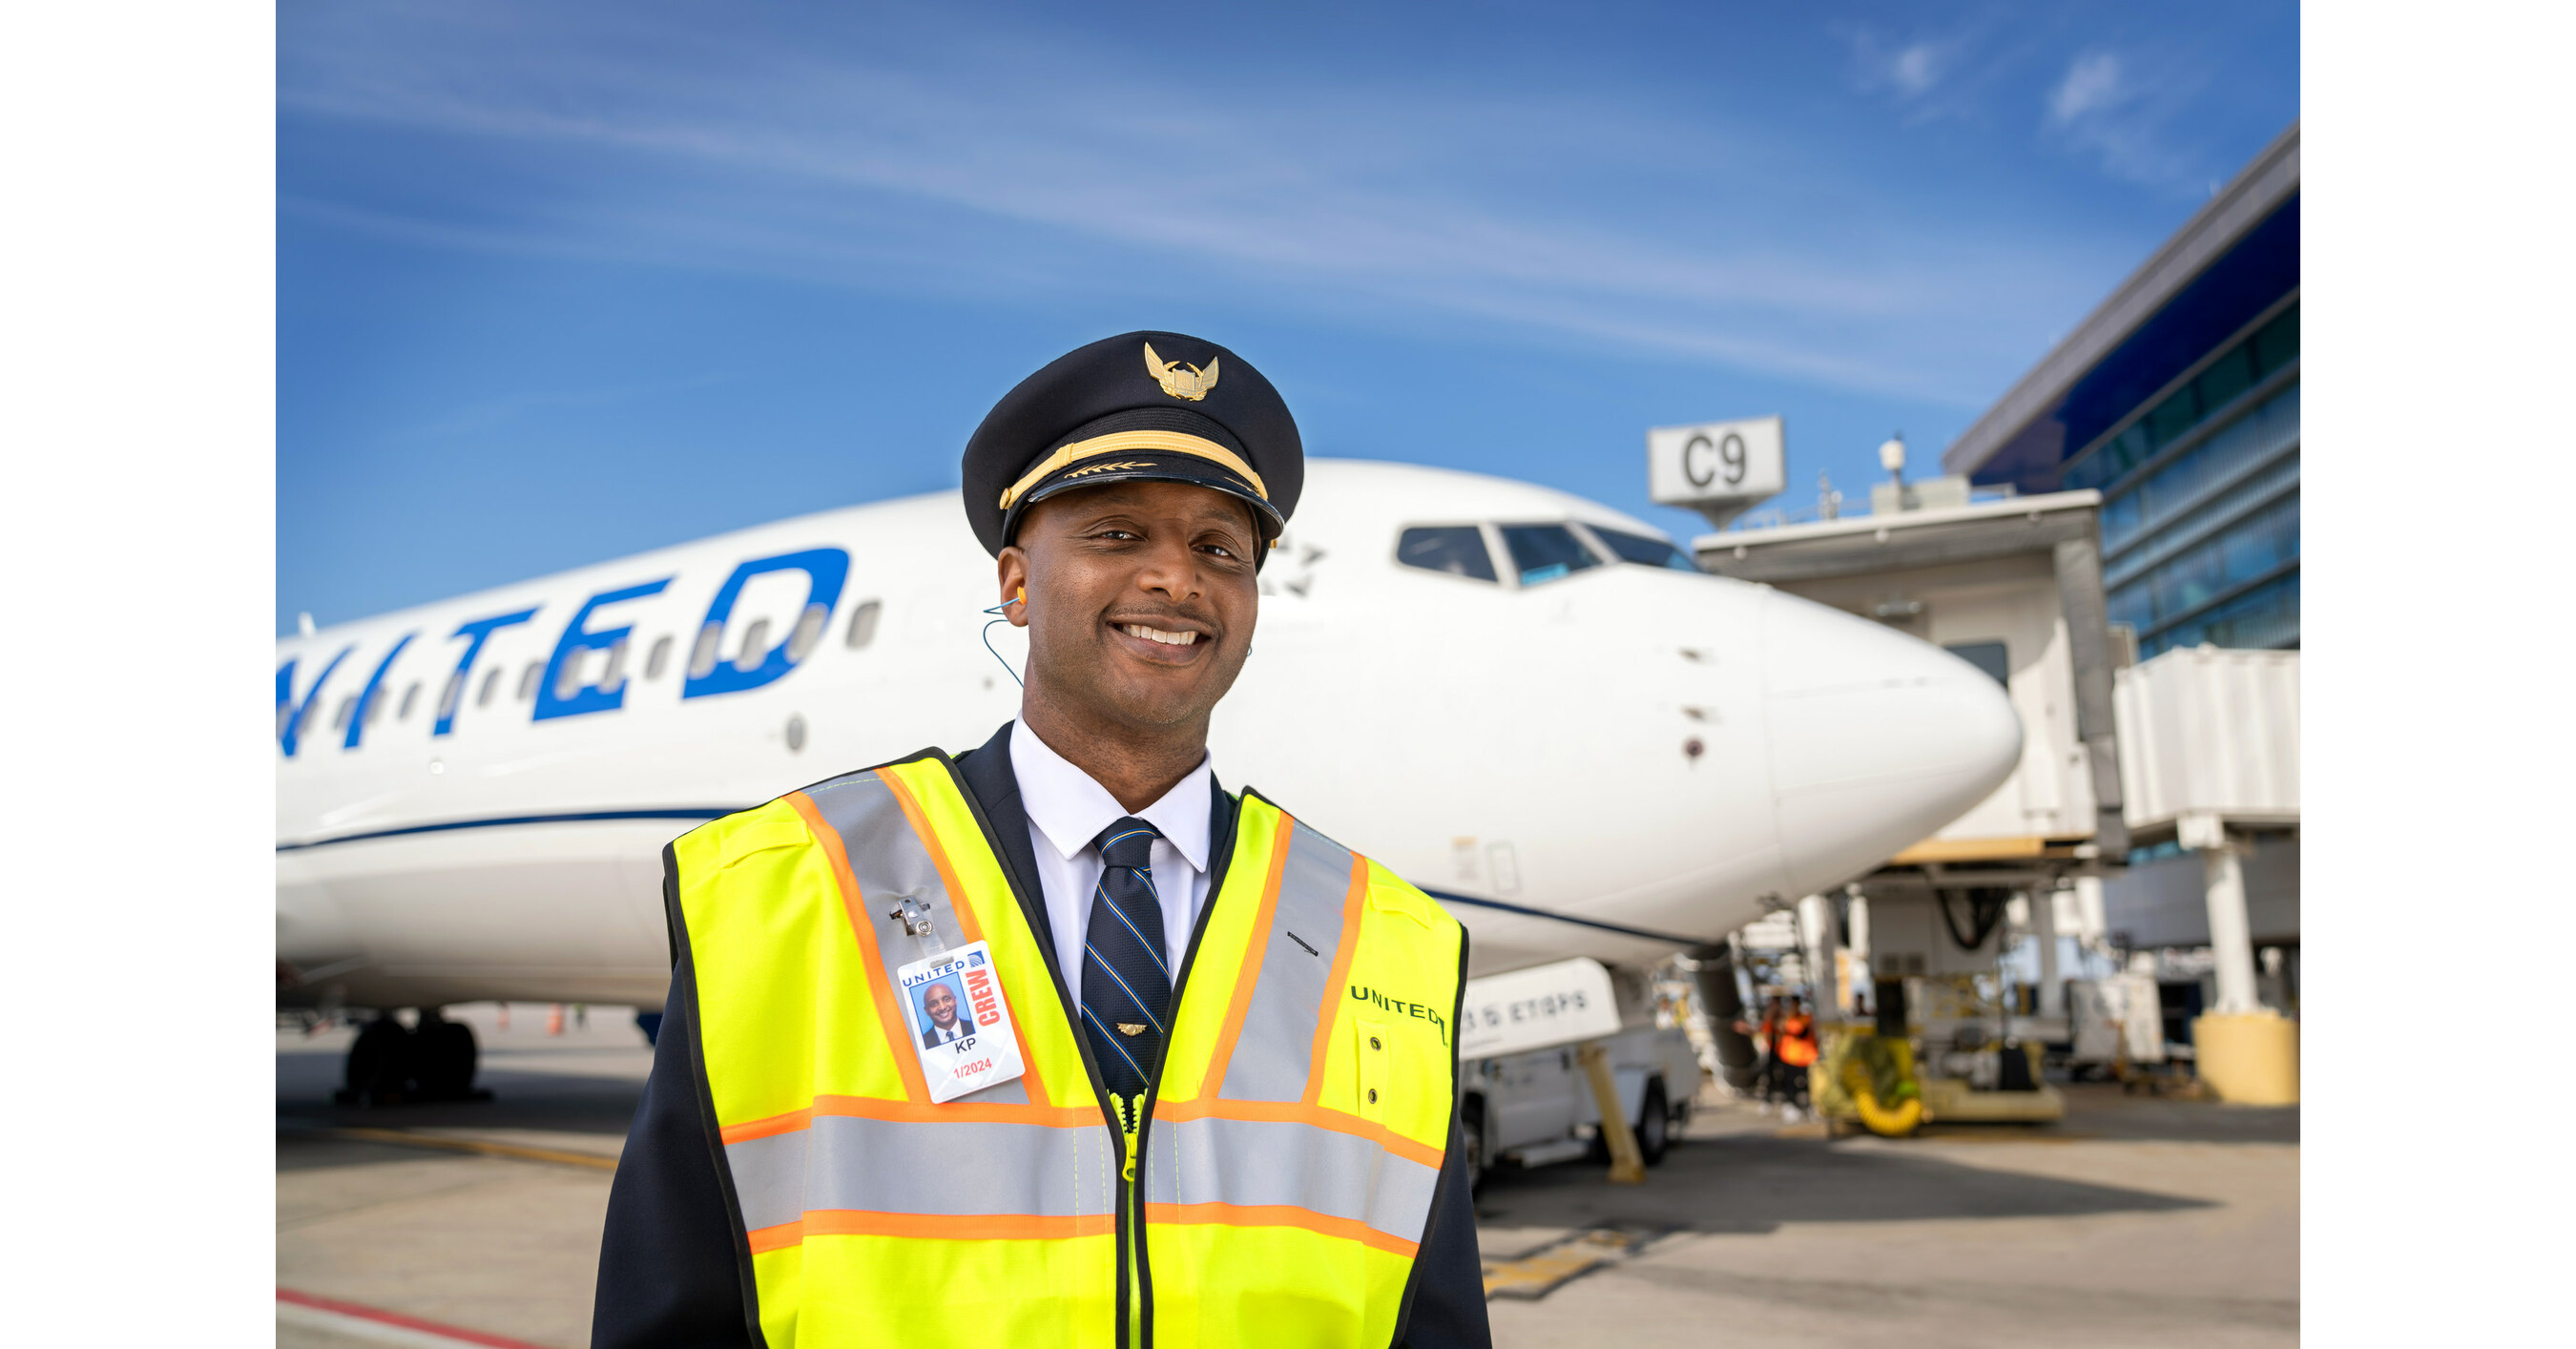 United Launches Industry-leading Program to Provide Active-duty